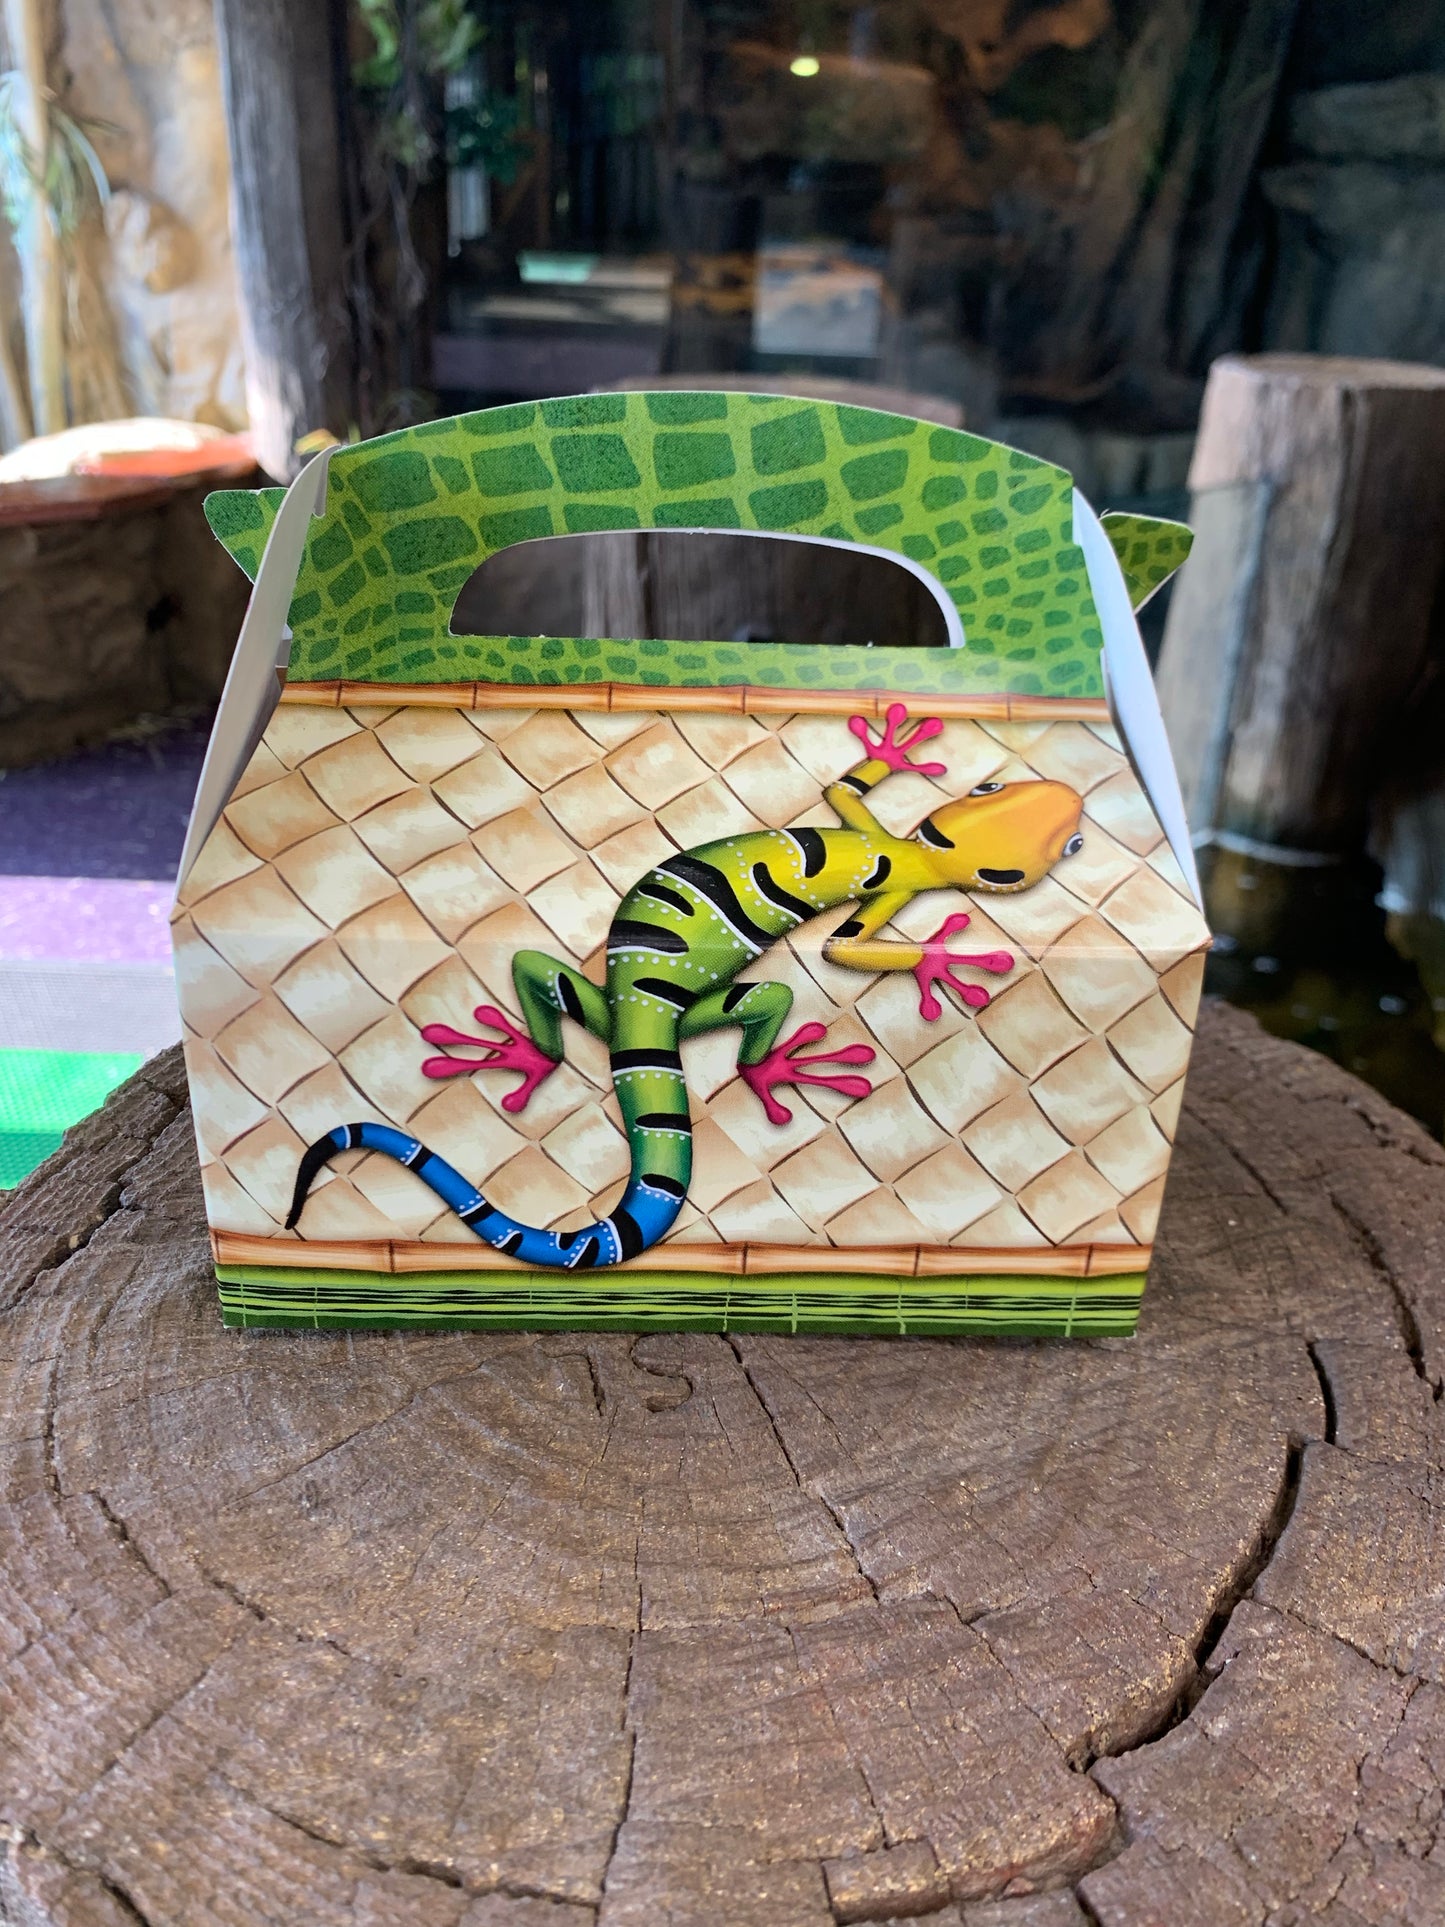 Reptile-Themed Goodie Boxes - Add To Your Private Event.